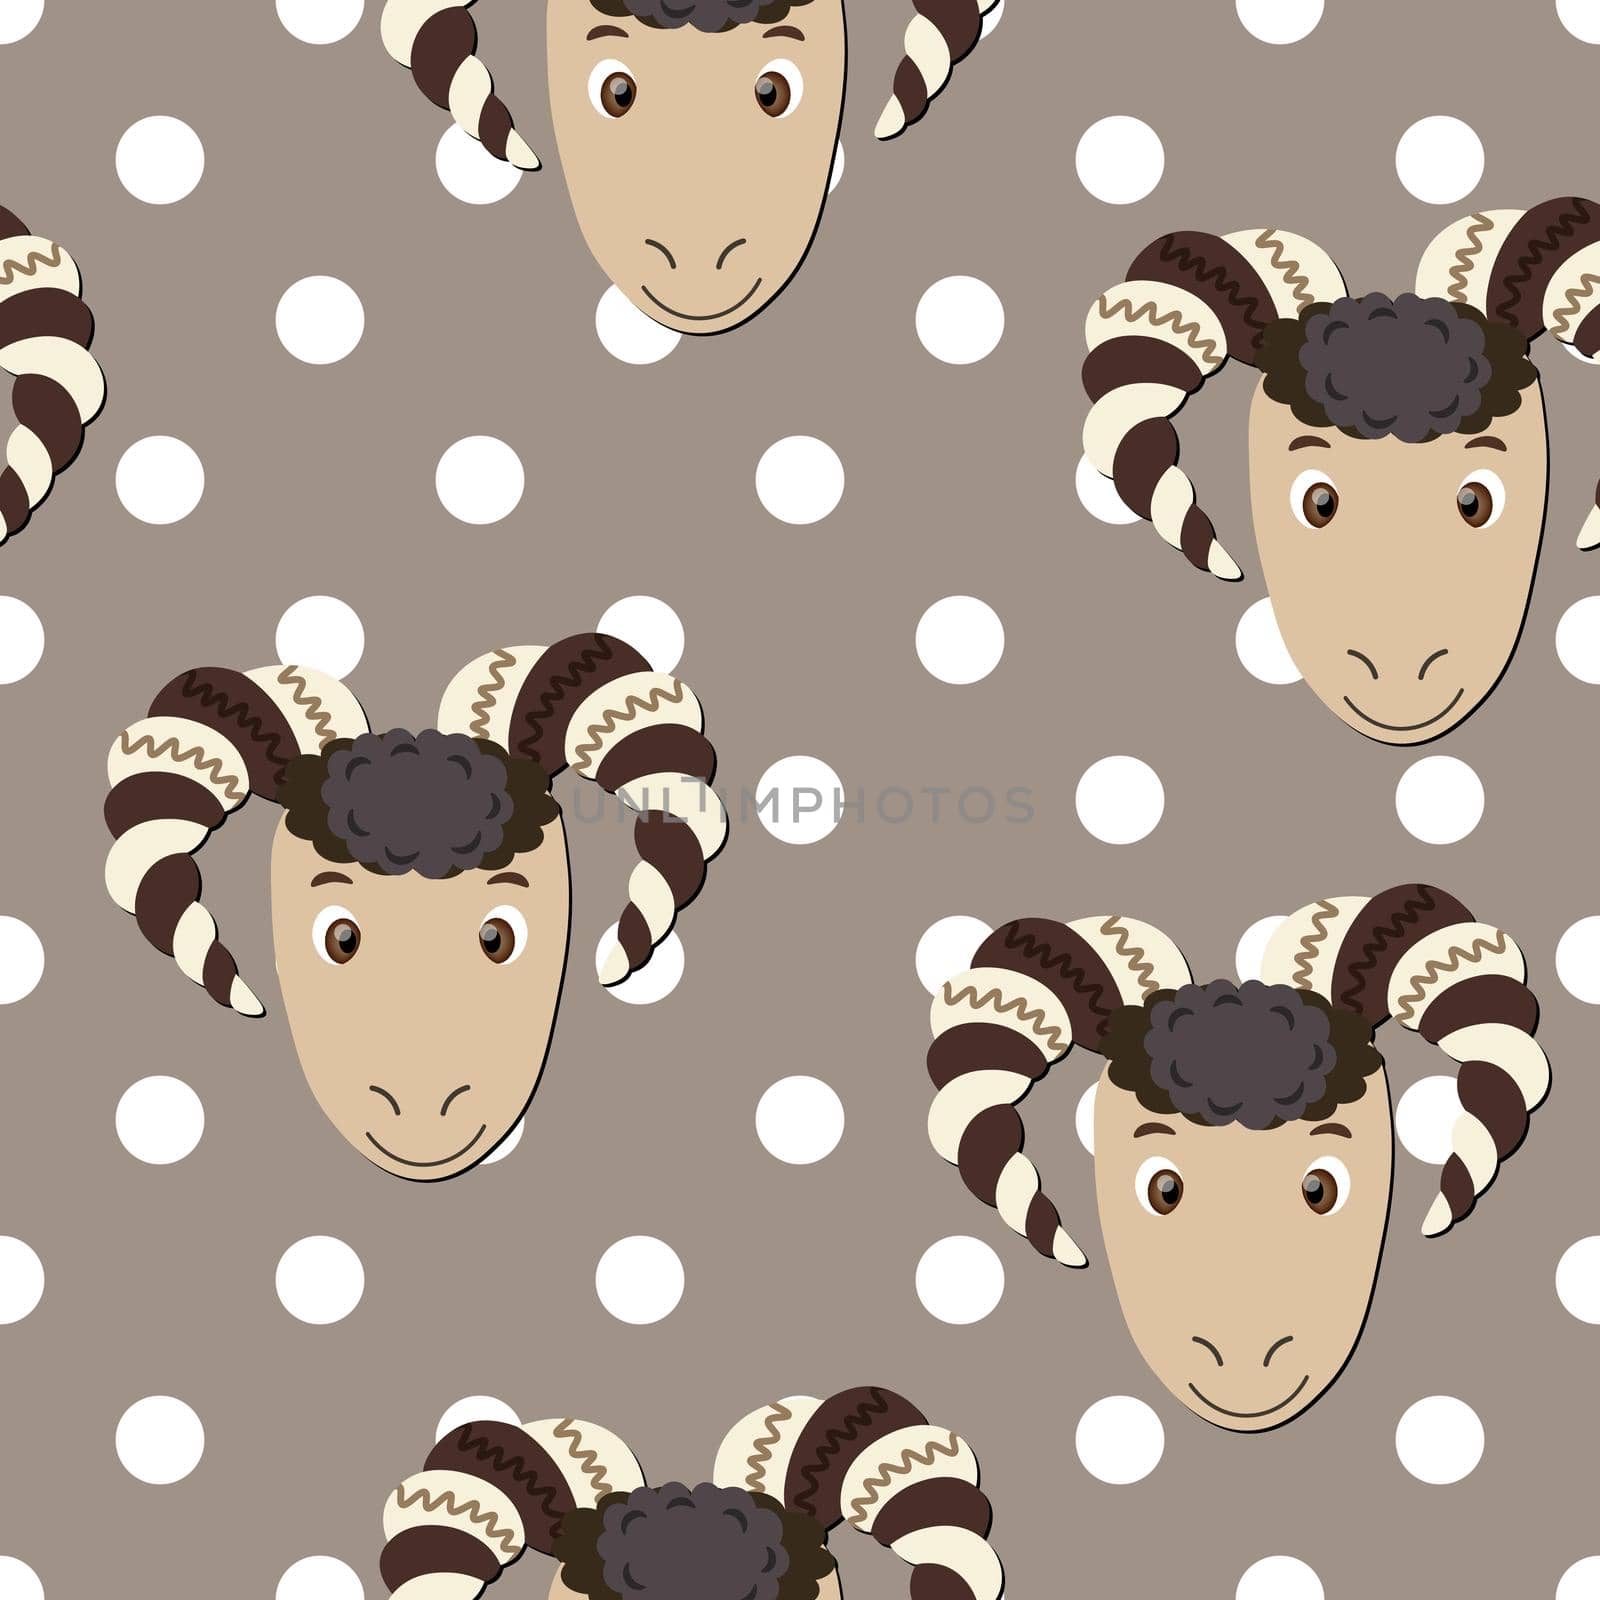 Vector flat animals colorful illustration for kids. Seamless pattern with ram face on beige polka dots background. Cute sheep. Adorable cartoon character. Design for textures, card, fabric, textile.